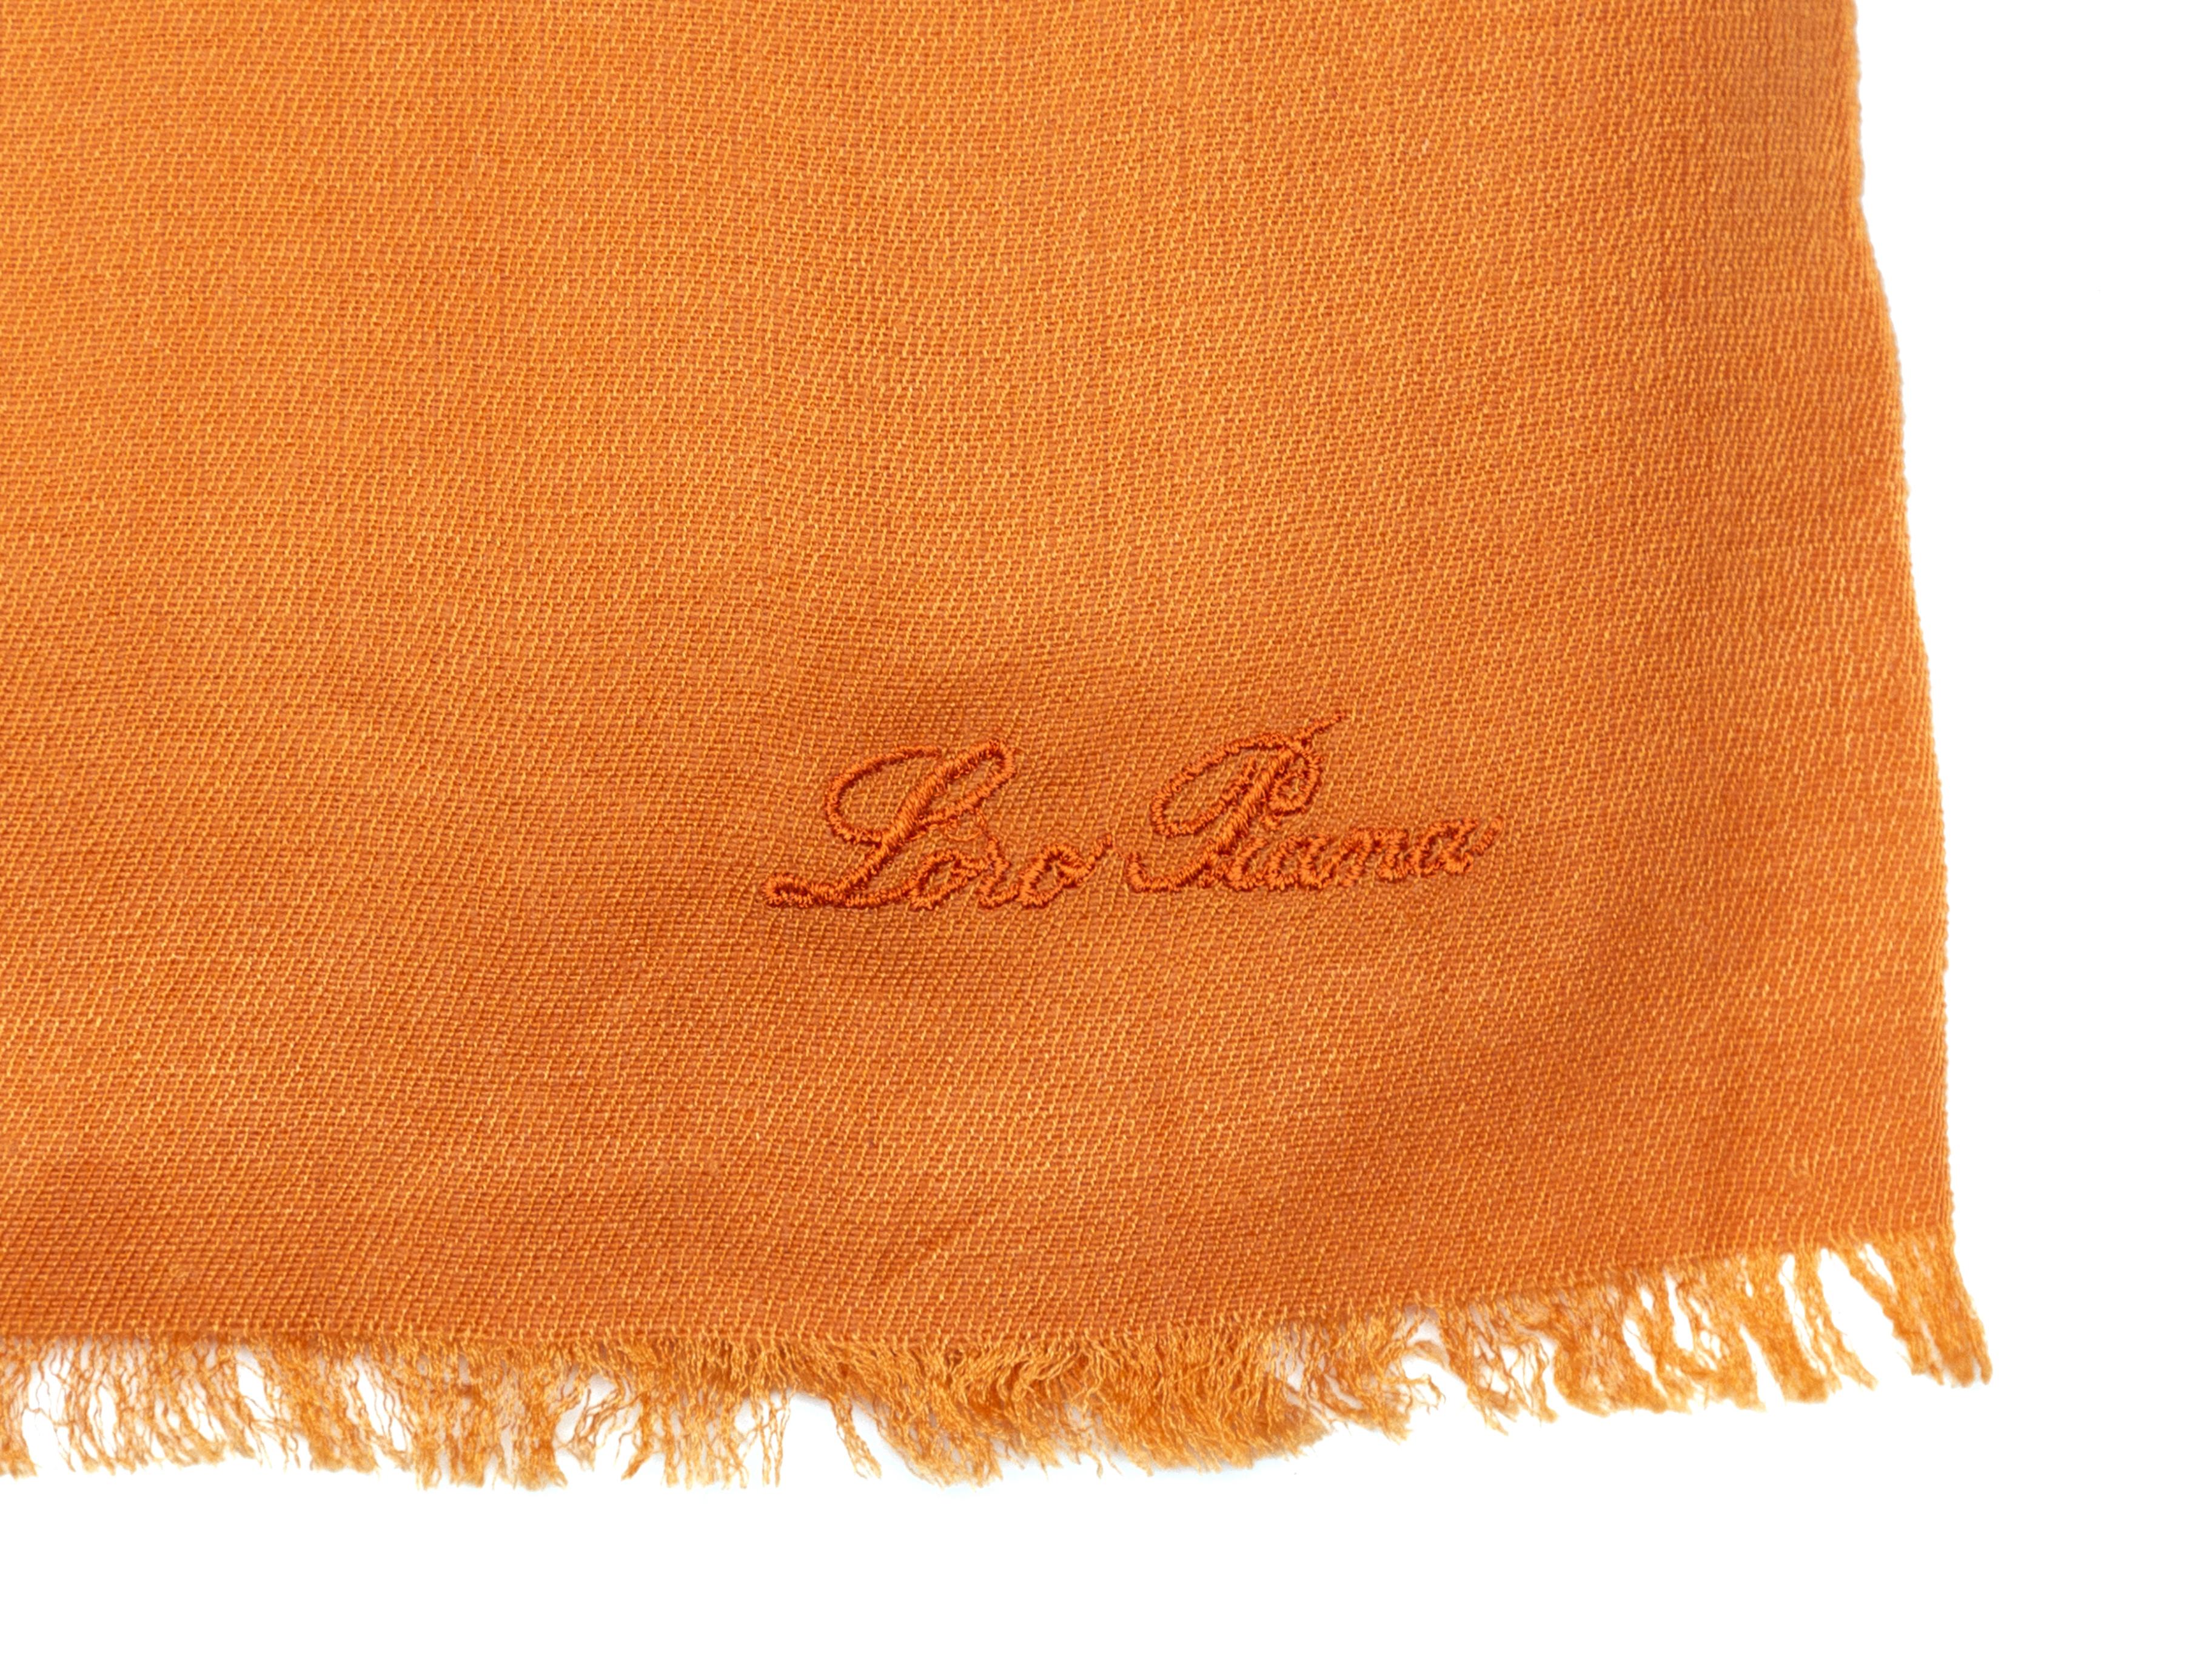 Product Details: Orange thin cashmere-blend scarf by Loro Piana. Fringe trim at ends. 86